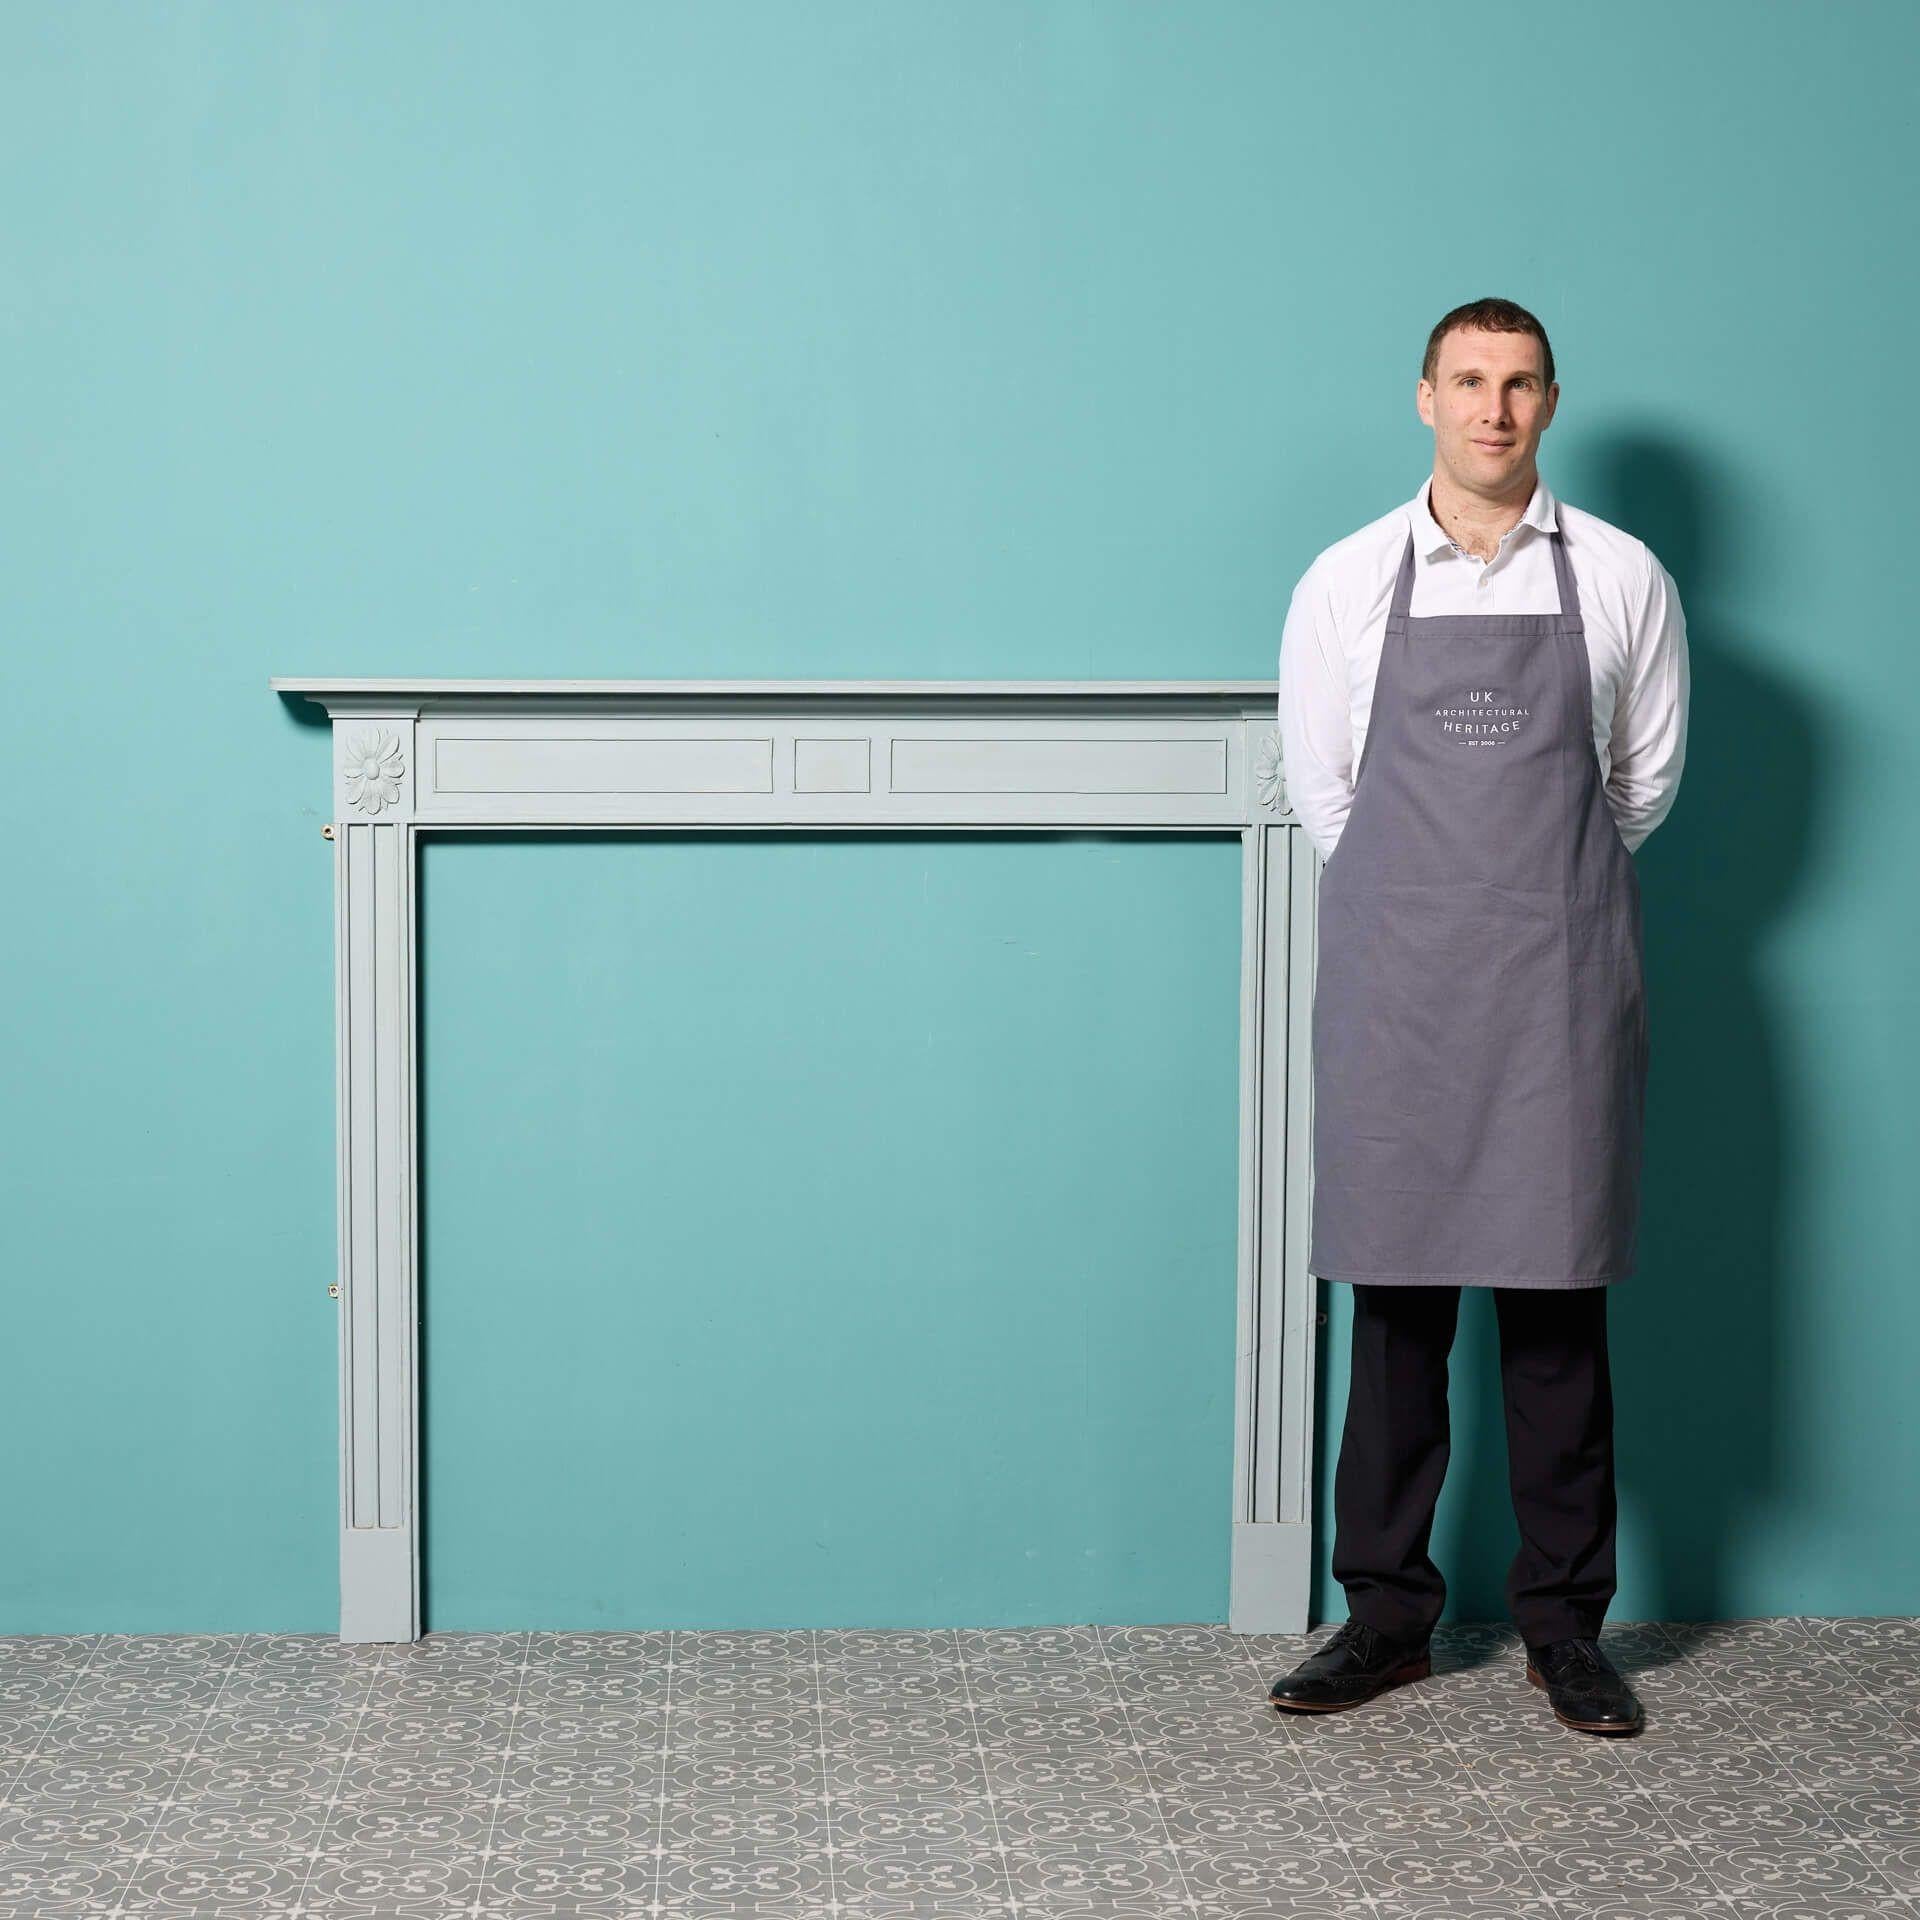 An English Georgian style fire surround constructed from pine, finished in a duck egg blue paint.

There are two of these fire surrounds available.

Additional dimensions:
Opening height 113.5 cm

Opening width 115 cm

Width between outside